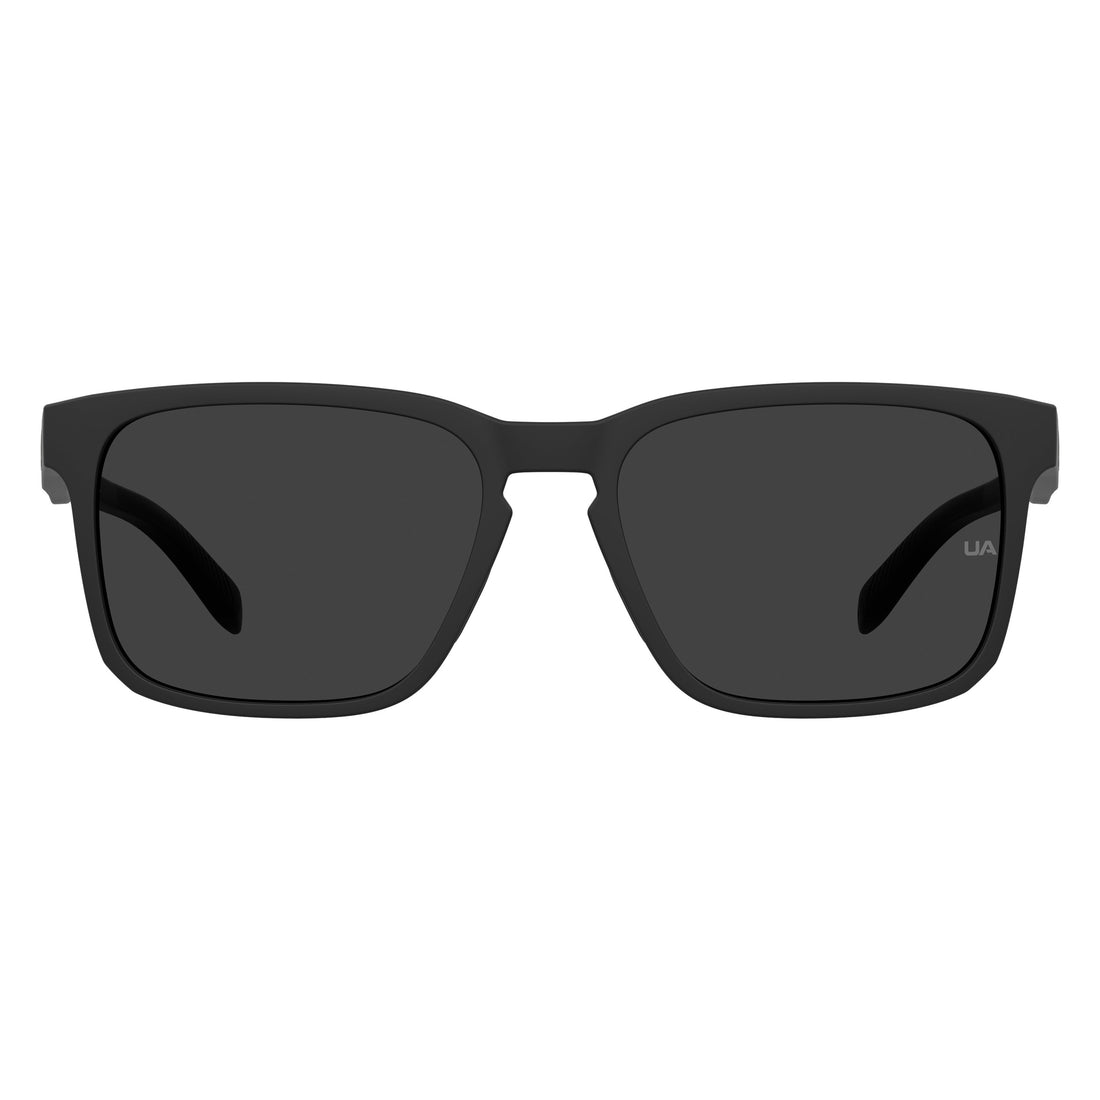 Running Sunglasses Collection